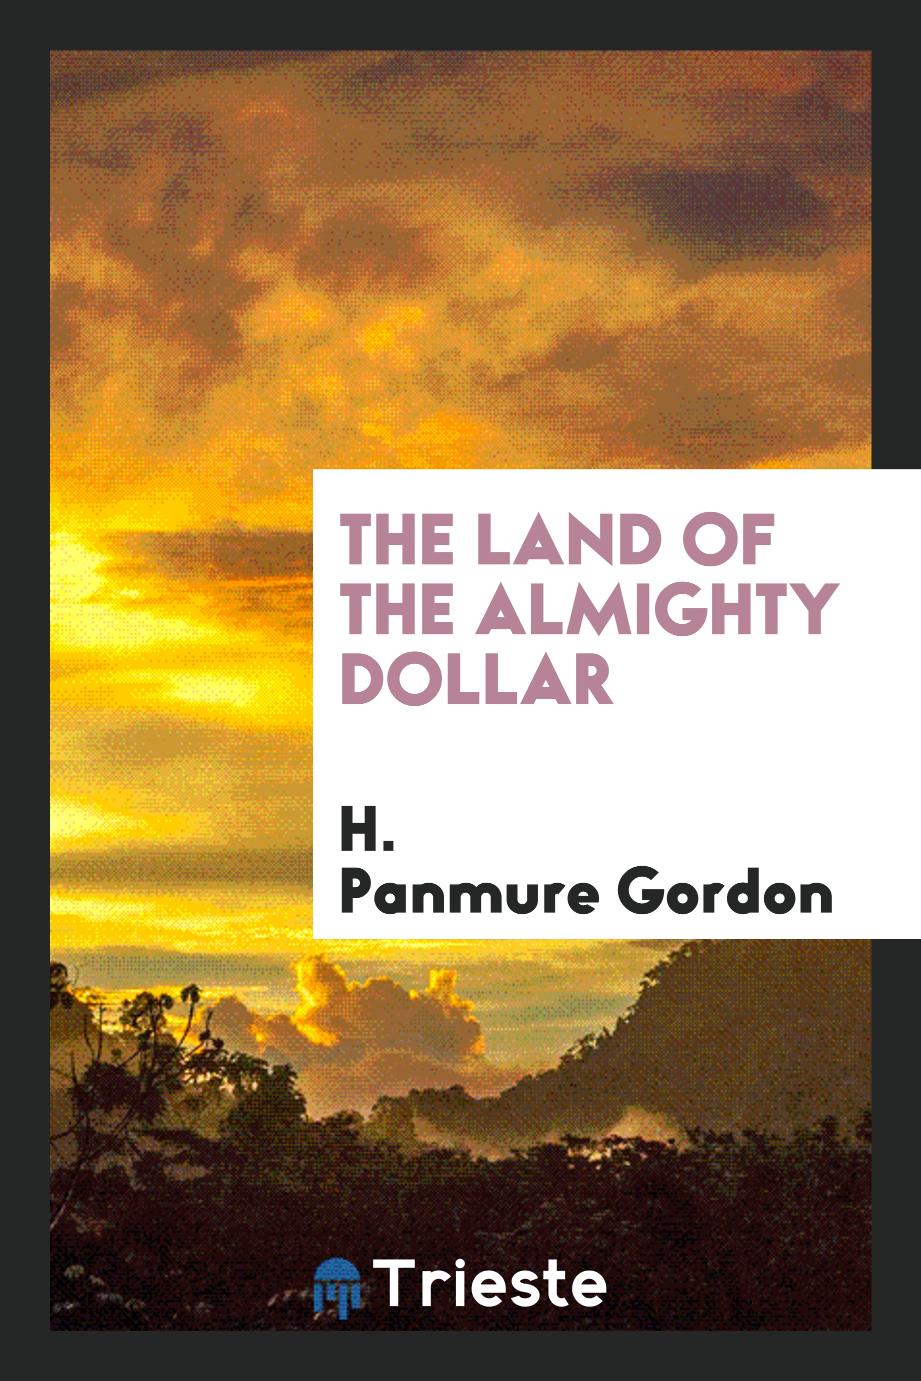 The land of the almighty dollar